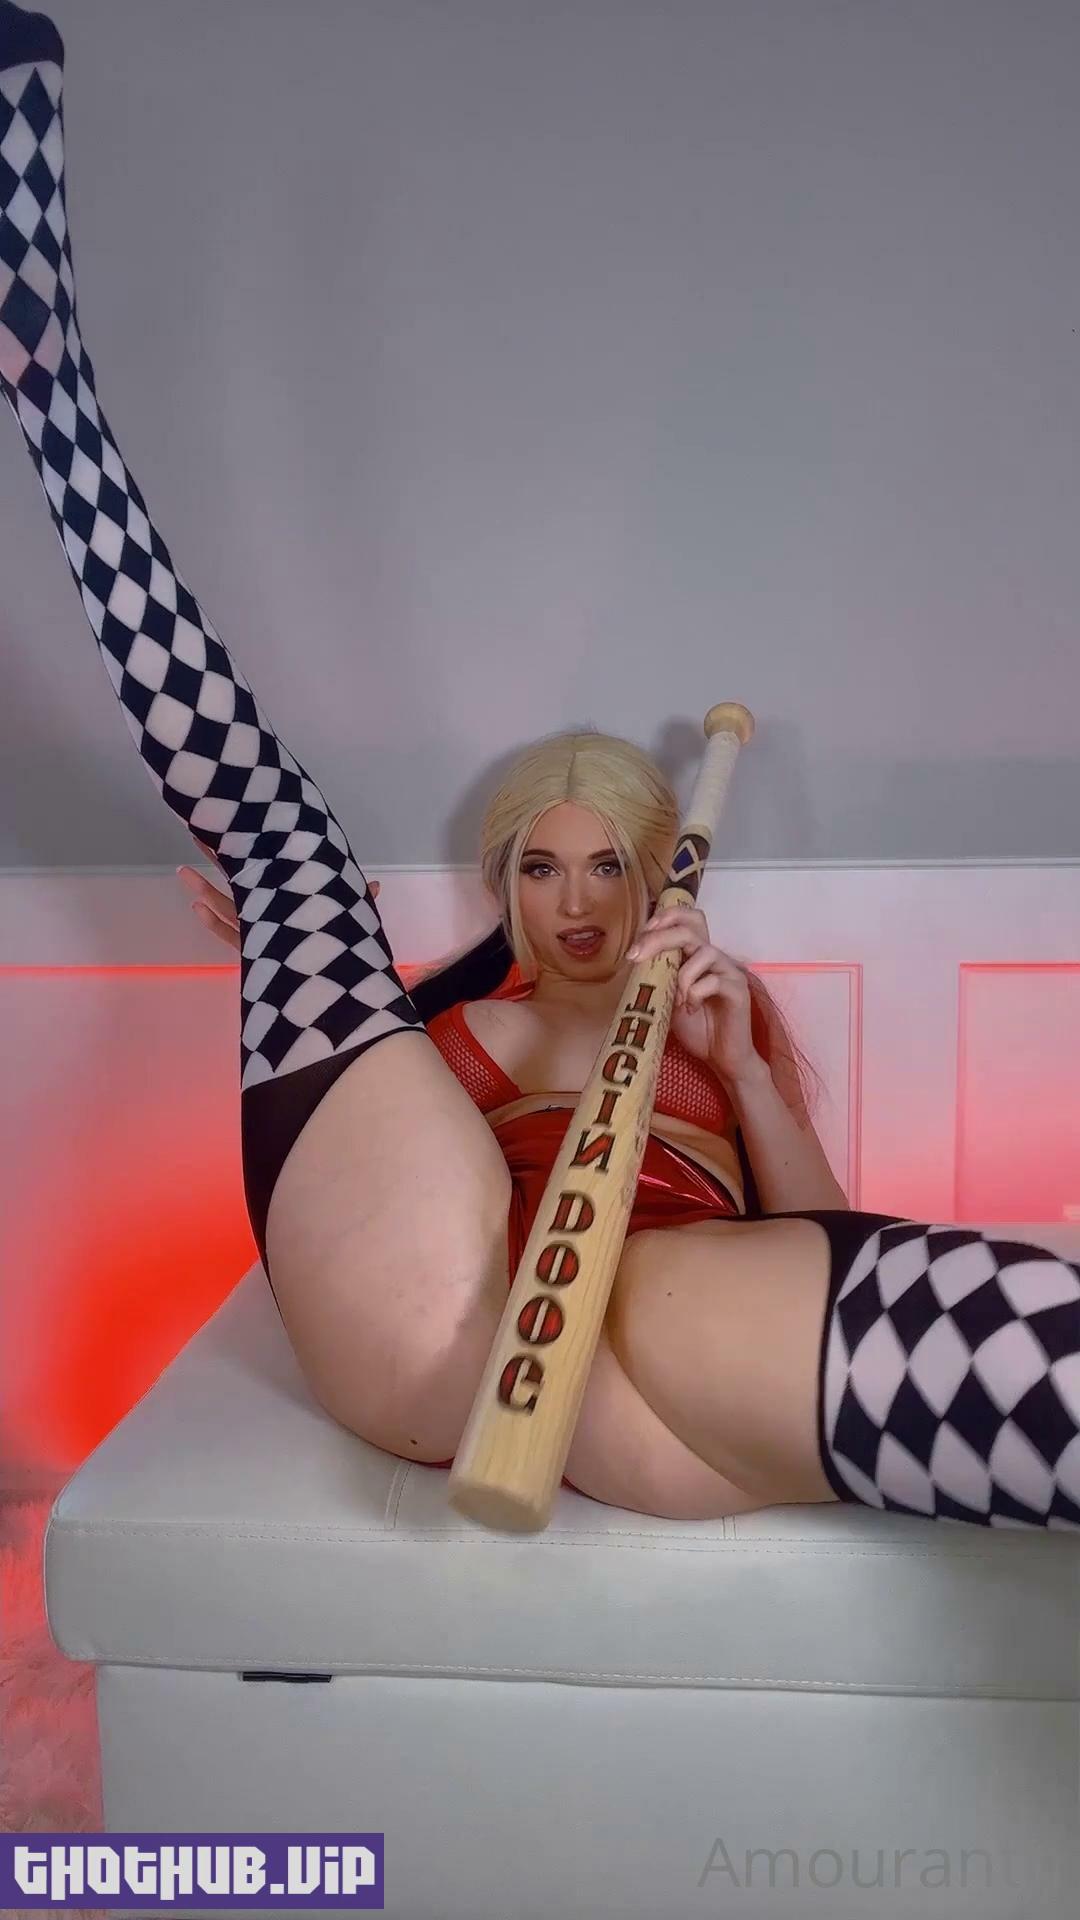 amouranth_harley_quinn_blowjob_onlyfans_video_leaked-LQZAOY.jpg